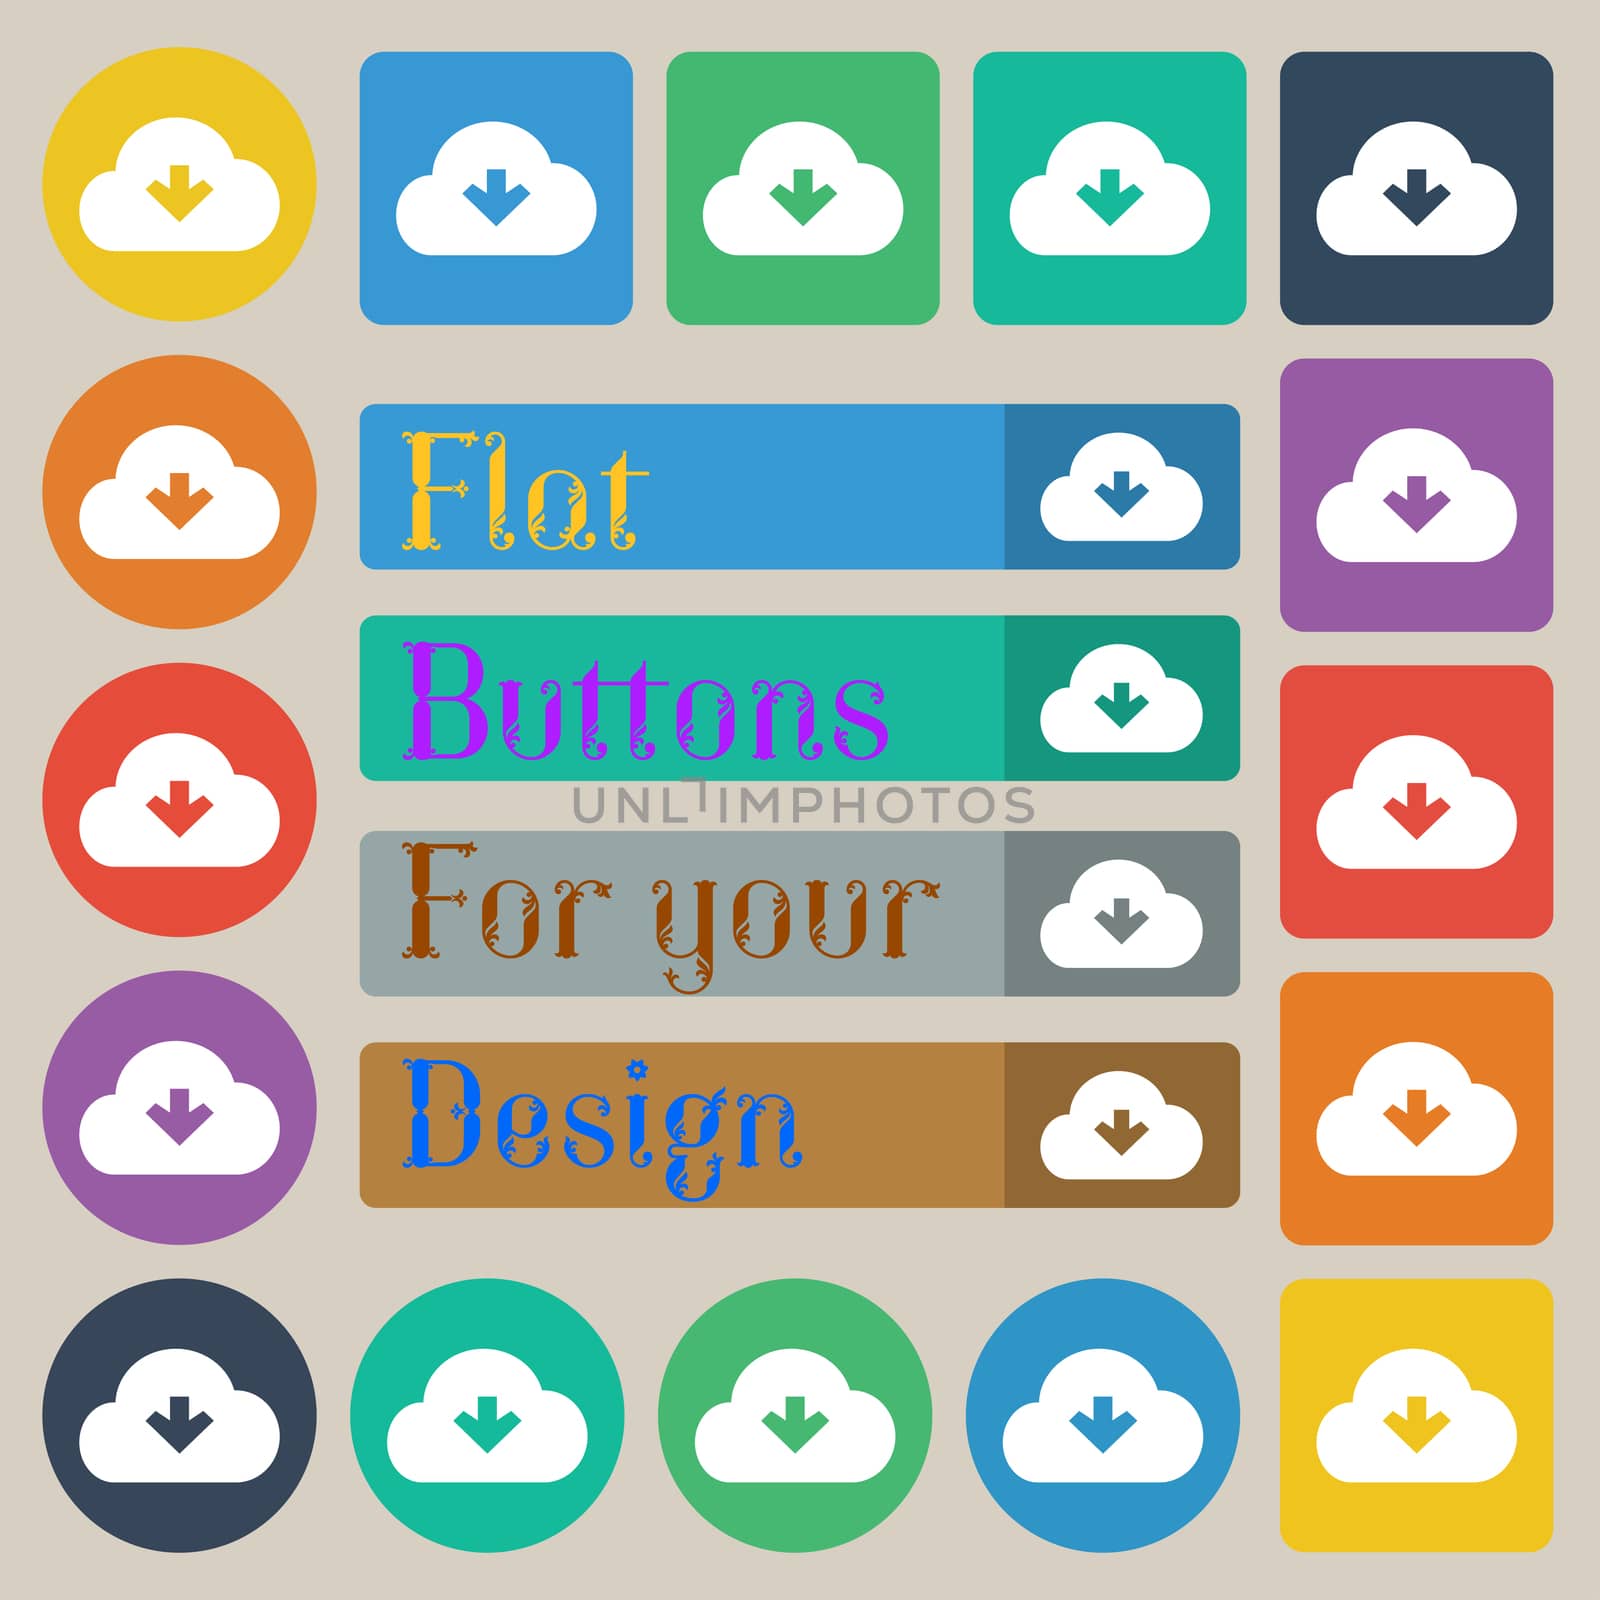 Download from cloud icon sign. Set of twenty colored flat, round, square and rectangular buttons. illustration